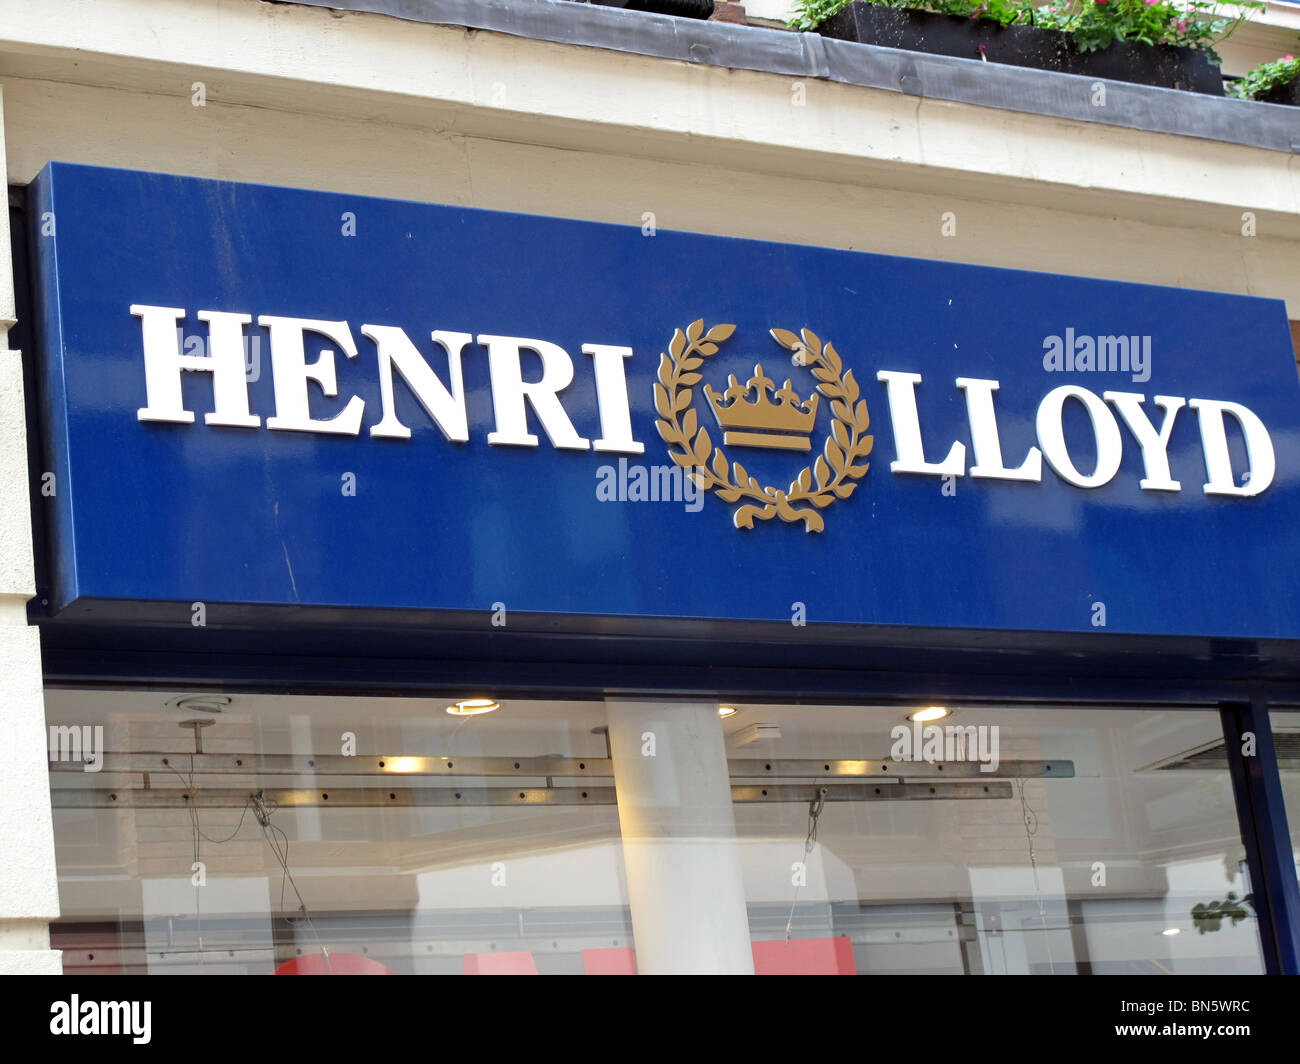 Henri Lloyd High Resolution Stock Photography and Images - Alamy